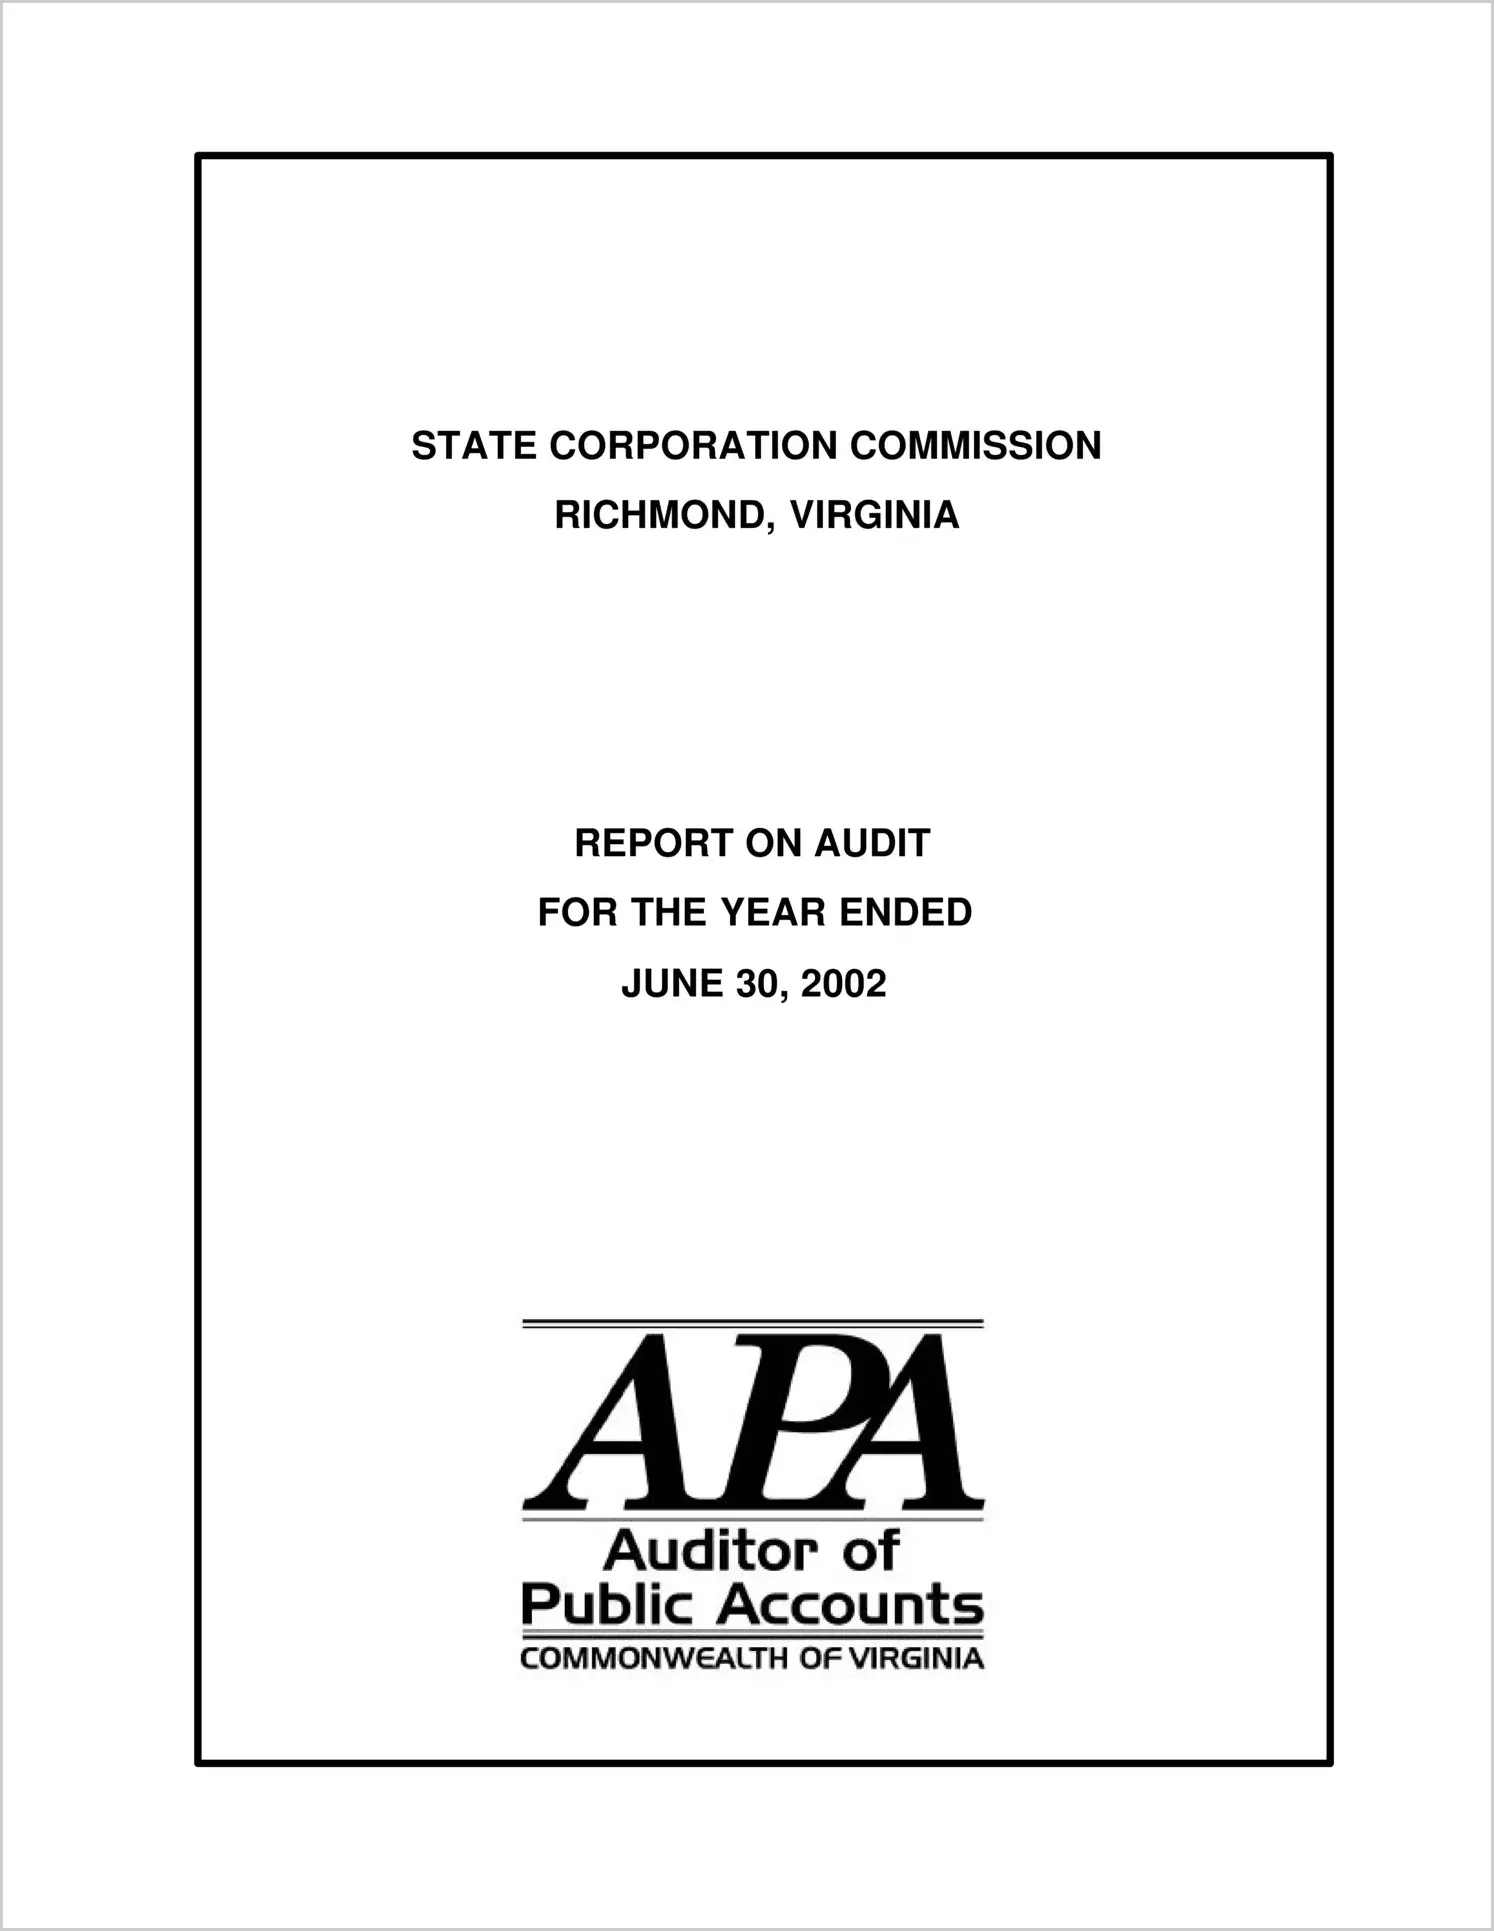 State Corporation Commission for the year ended June 30, 2002